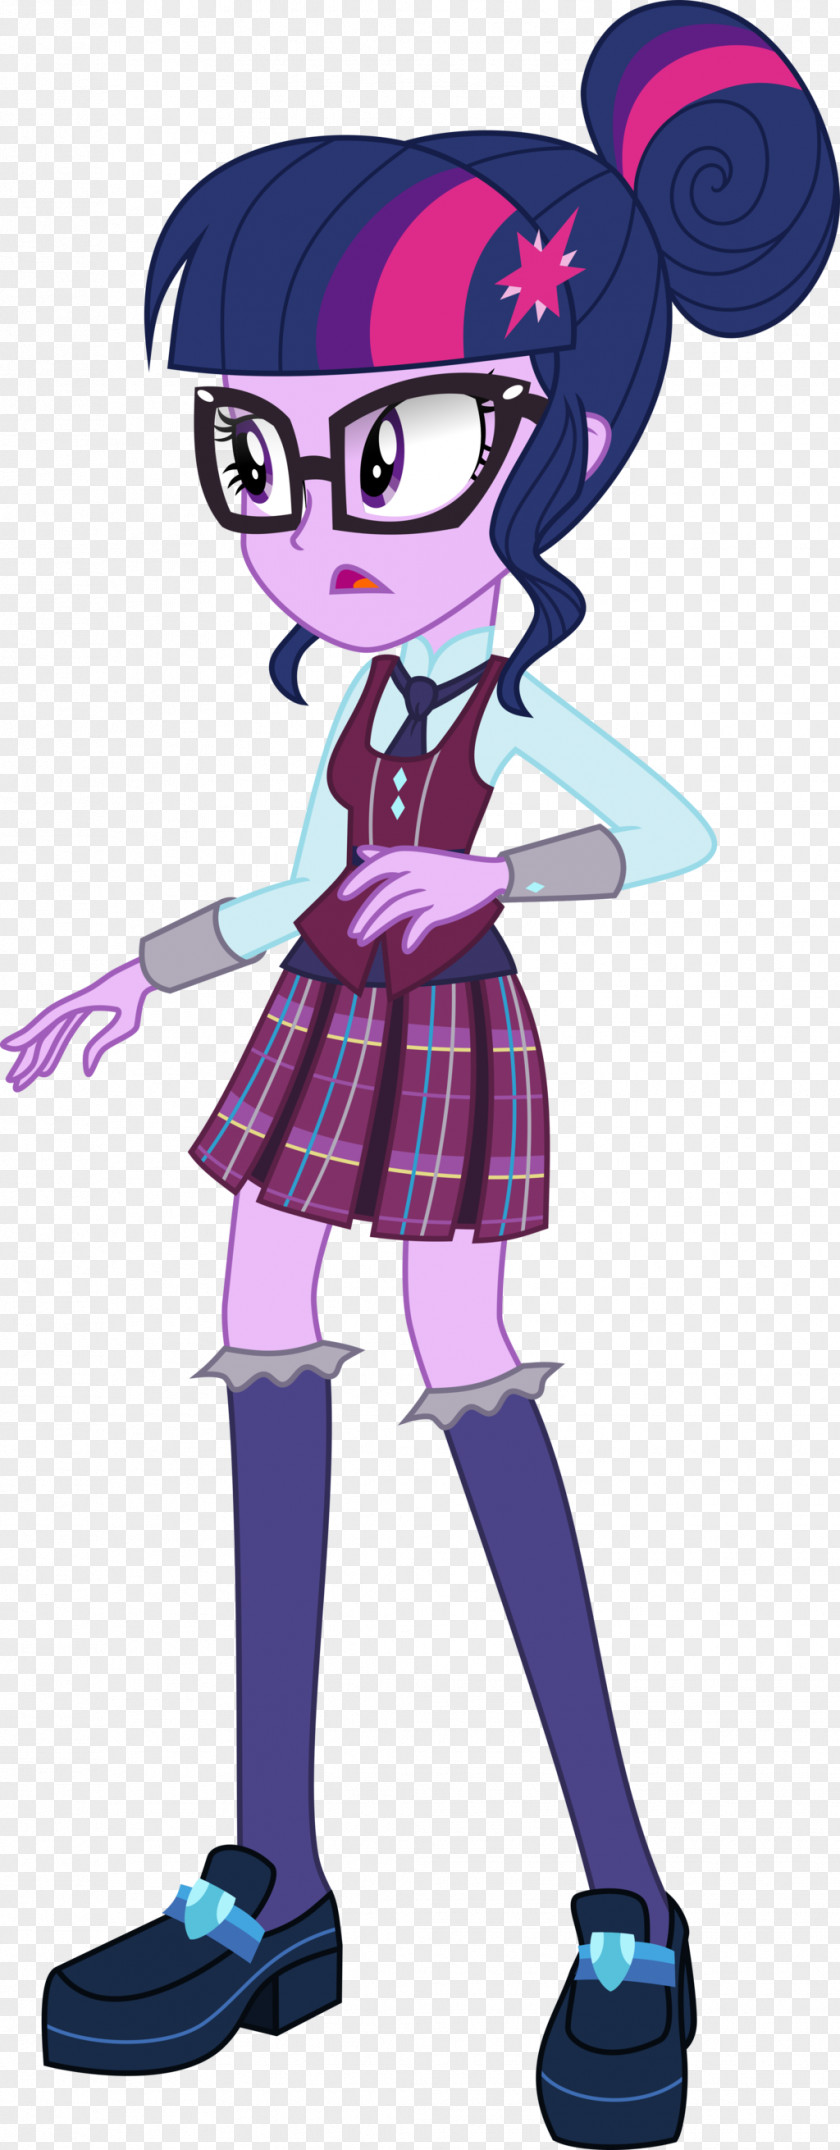 Rarity Equestria Girls Roller Skate Twilight Sparkle Spike My Little Pony: PNG